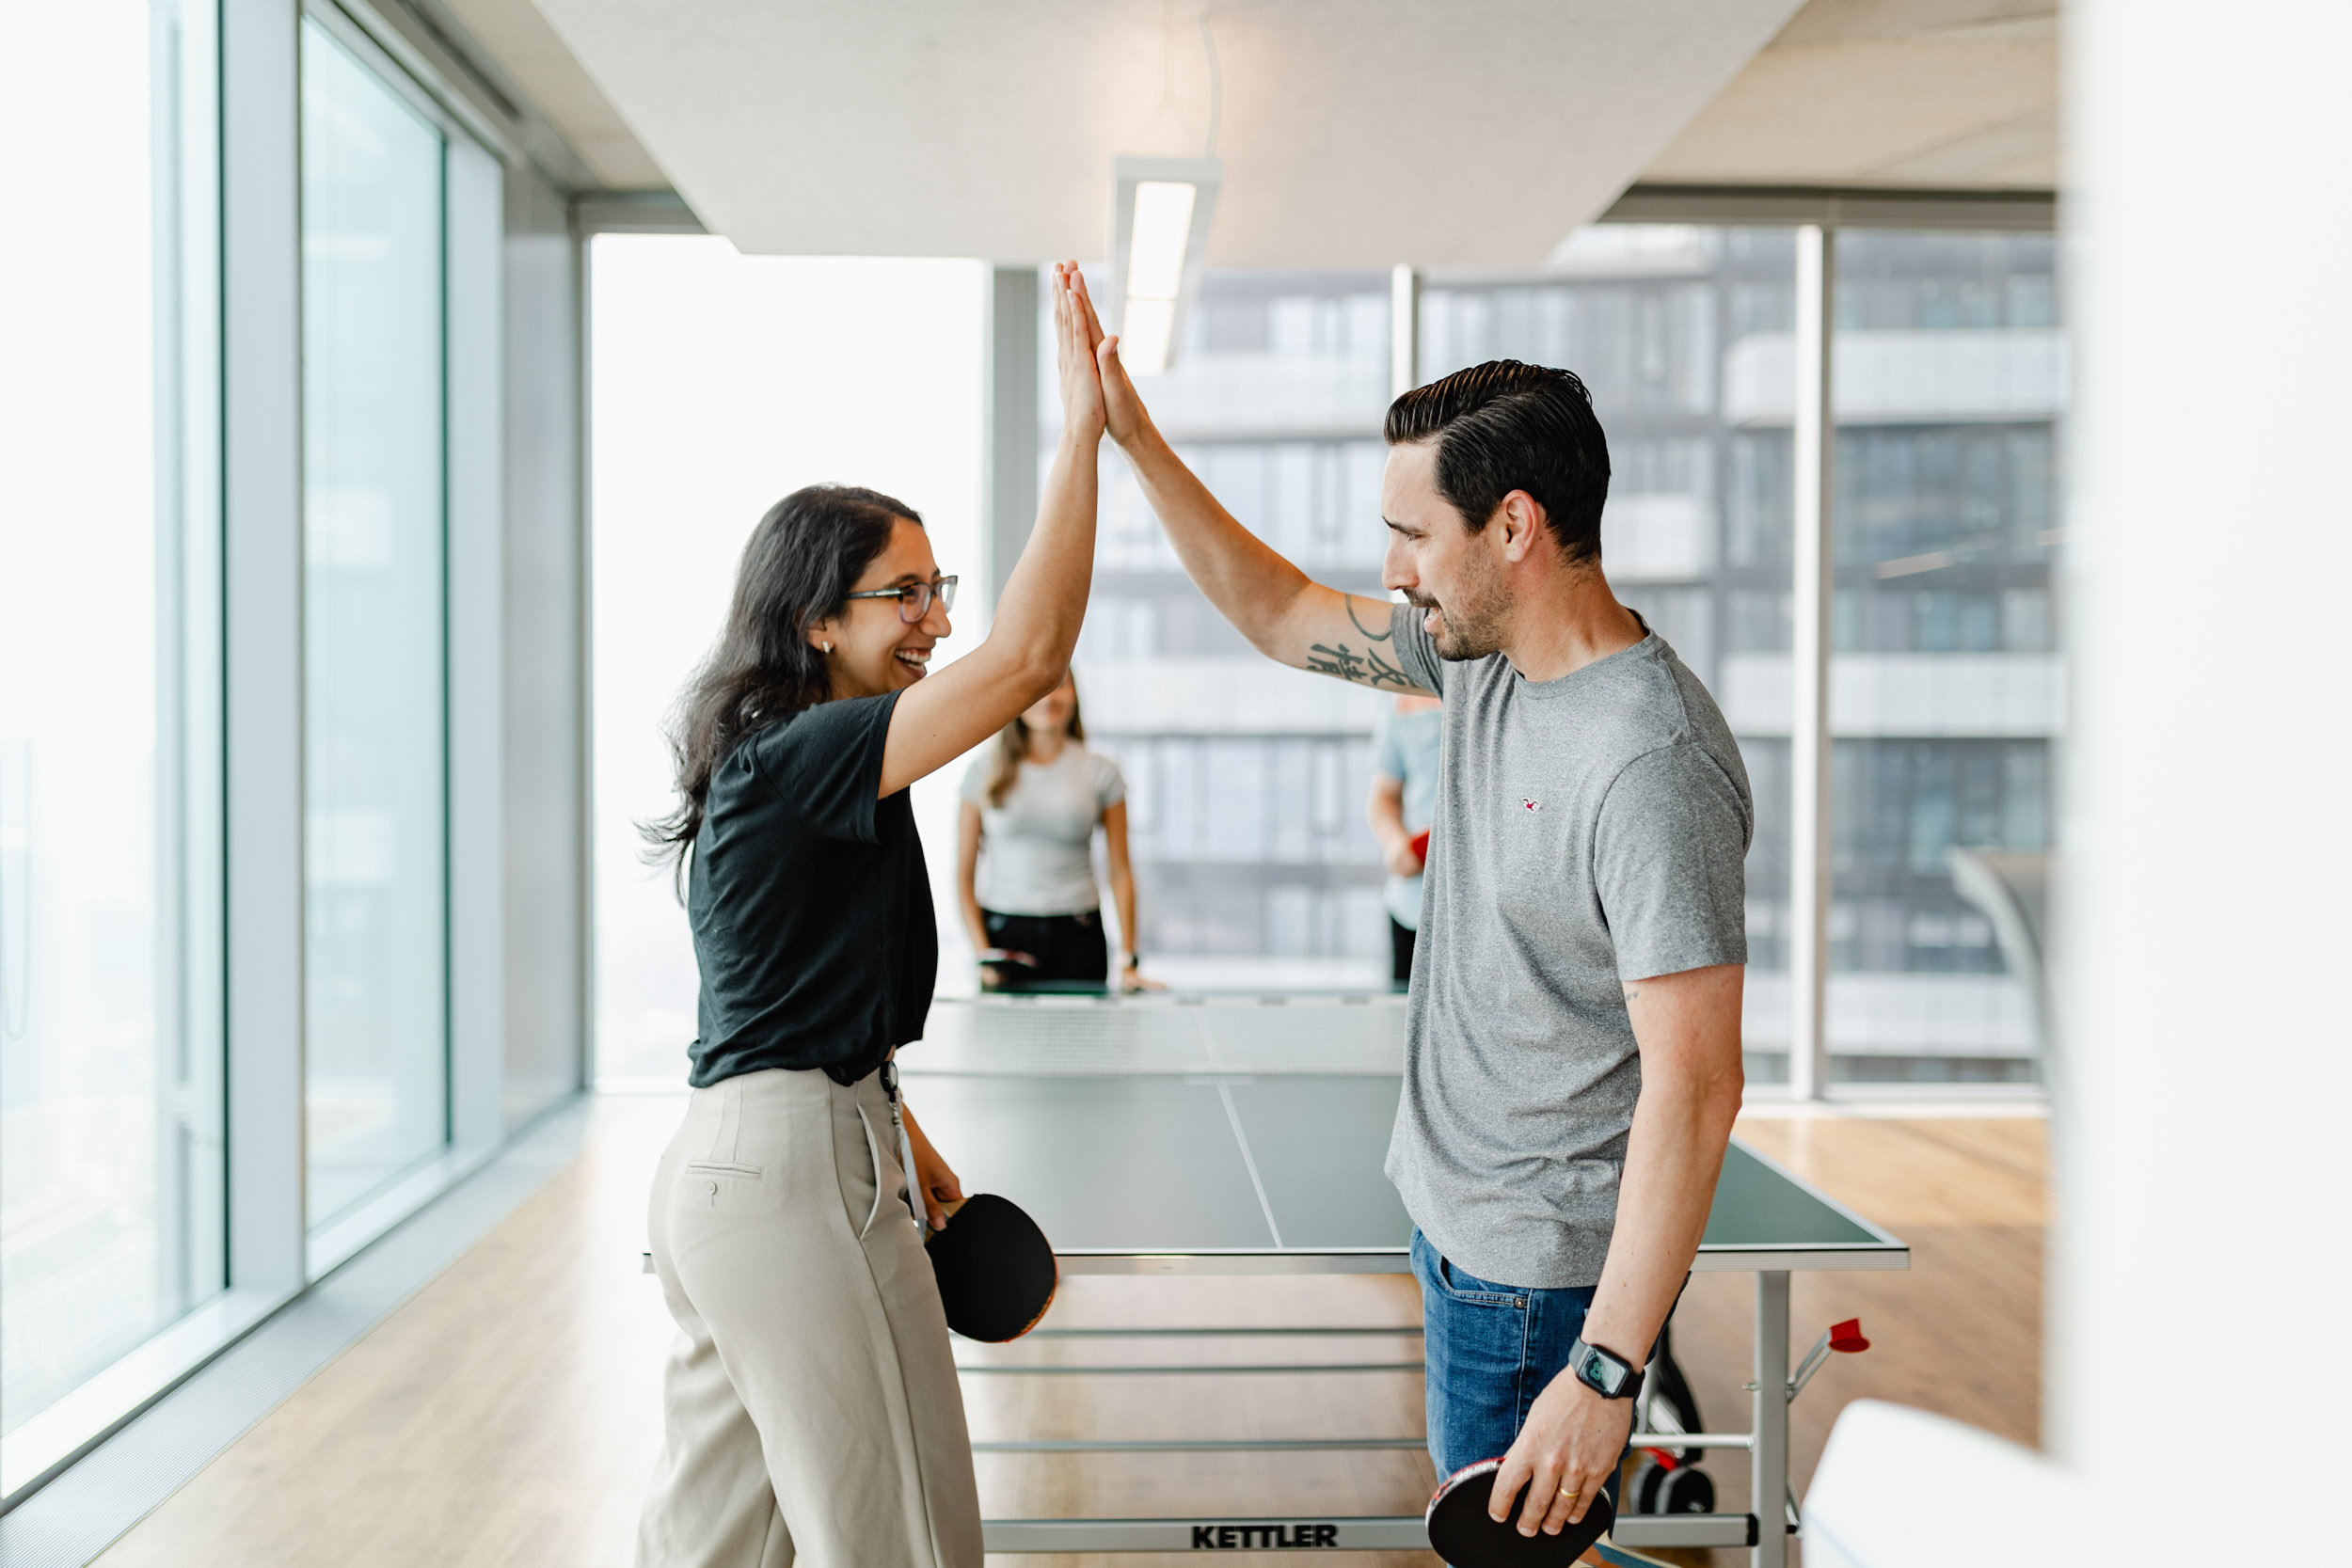 Two individuals engaged in a lively game of ping pong within an office space.